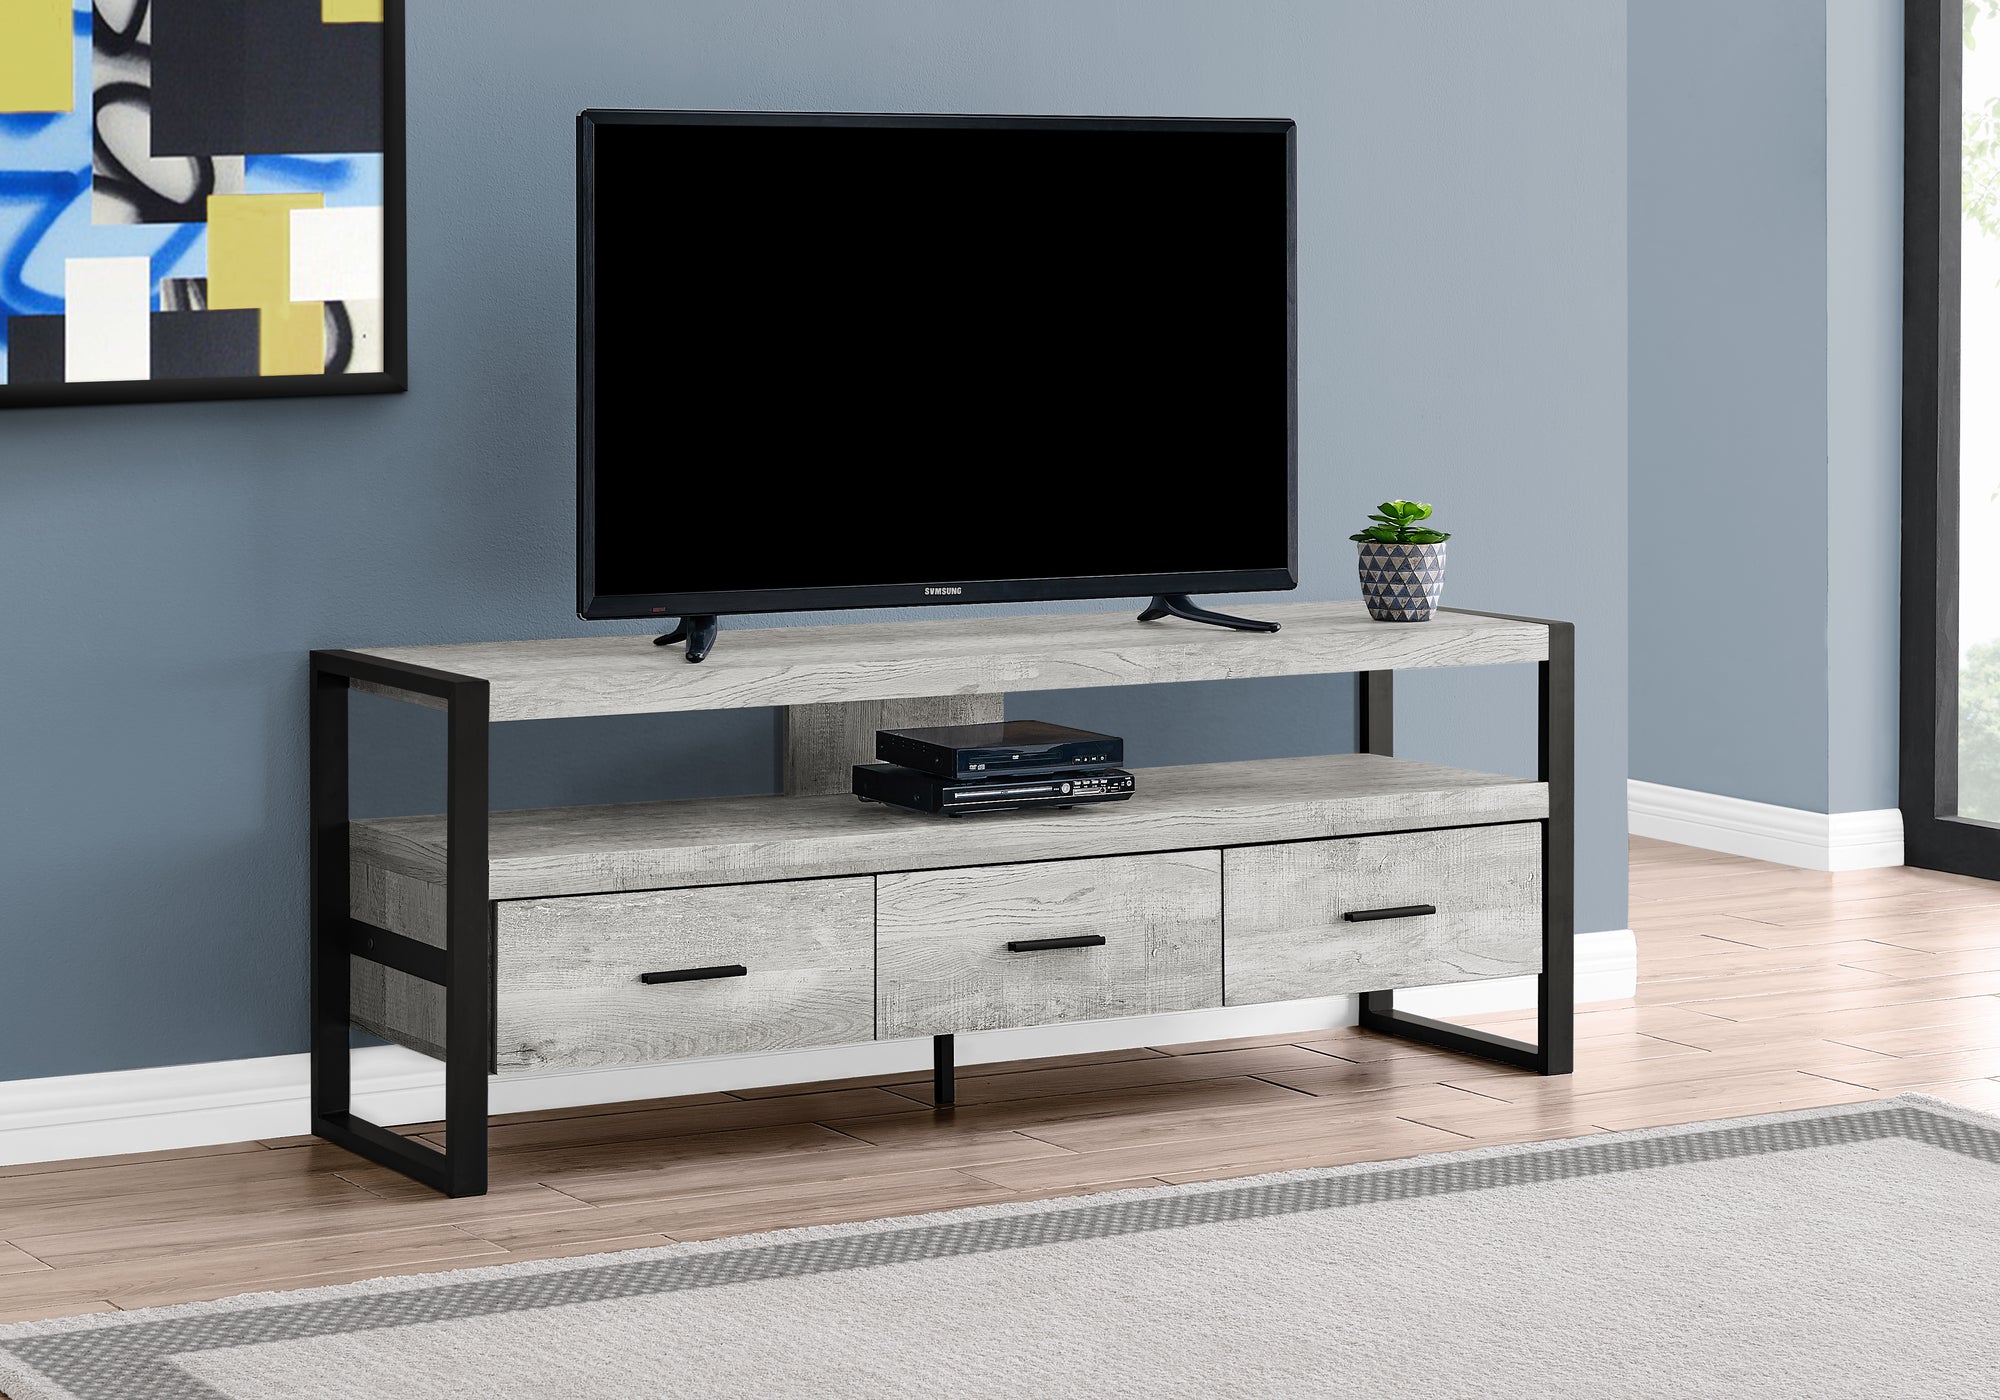 MN-442821    Tv Stand, 60 Inch, Console, Media Entertainment Center, Storage Cabinet, Living Room, Bedroom, Laminate, Metal, Grey Reclaimed Wood Look, Black, Contemporary, Modern